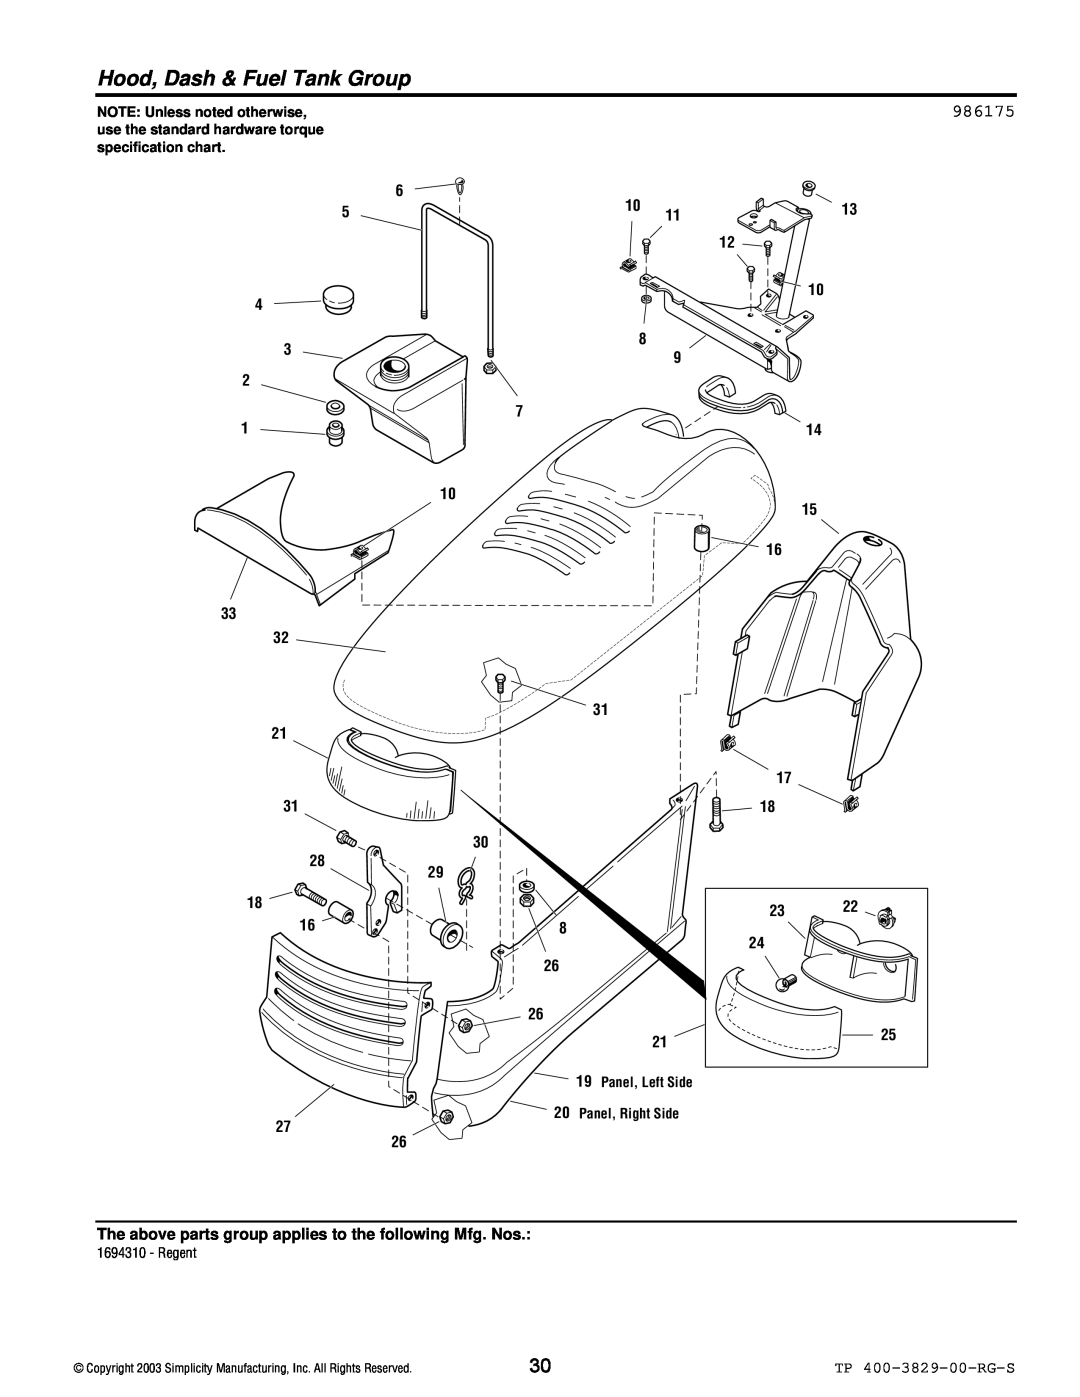 Simplicity 1693920, 1694310, 1693930 986175, Hood, Dash & Fuel Tank Group, TP 400-3829-00-RG-S, NOTE Unless noted otherwise 